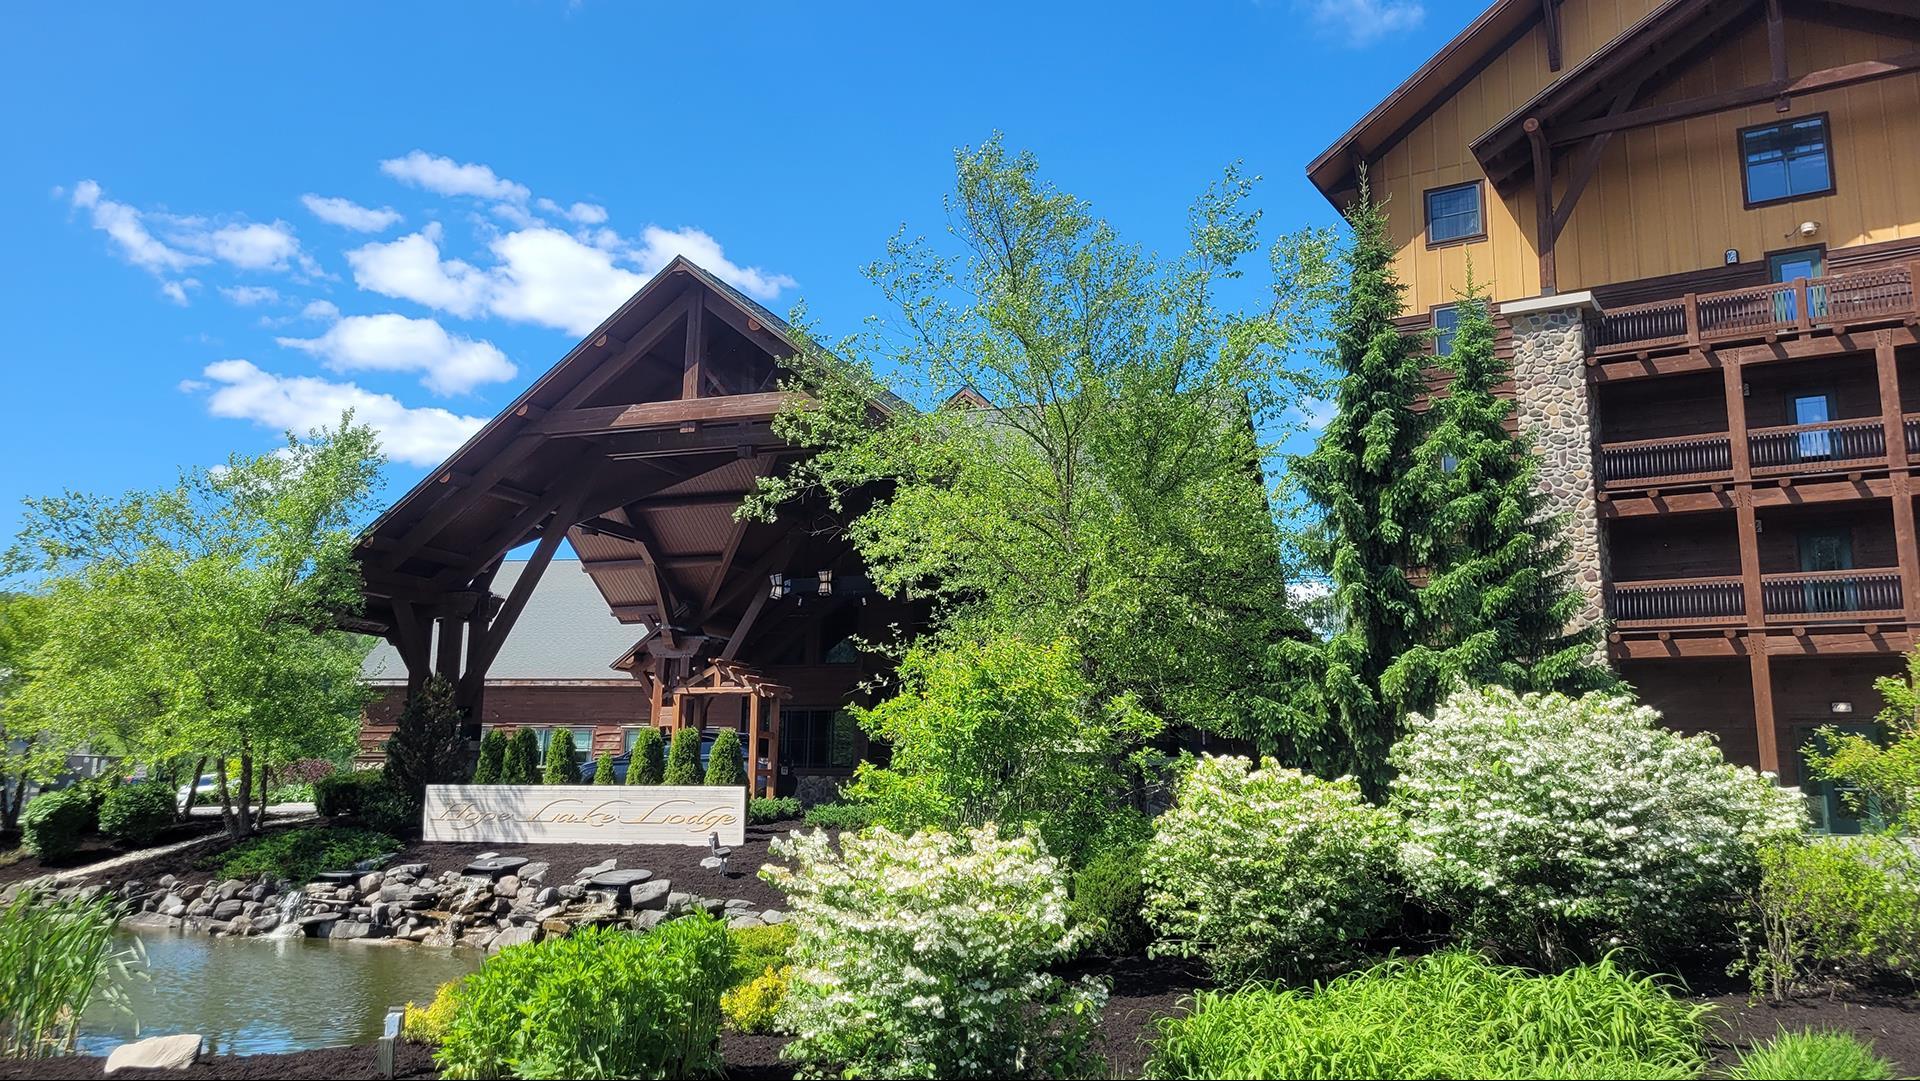 Greek Peak Mountain Resort - Hope Lake Lodge and Conference Center in Cortland, NY